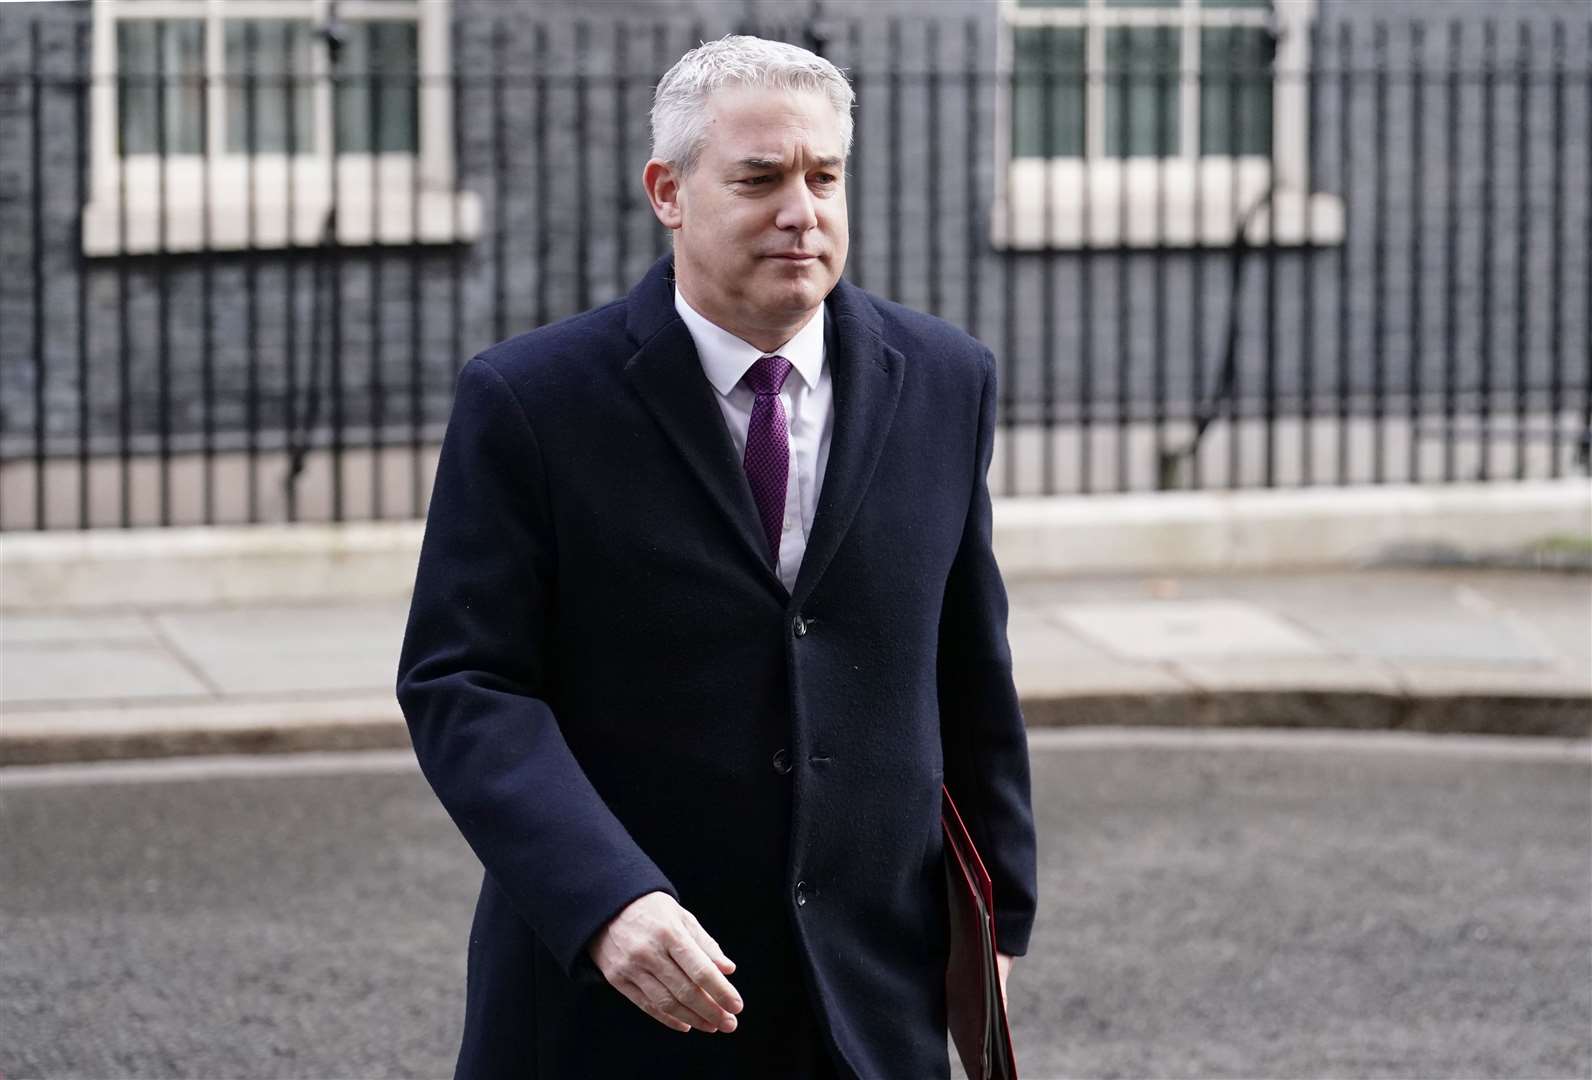 Health Secretary Steve Barclay has been accused of ‘trying to pinch pennies’ over junior doctors’ pay (Jordan Pettitt/PA)